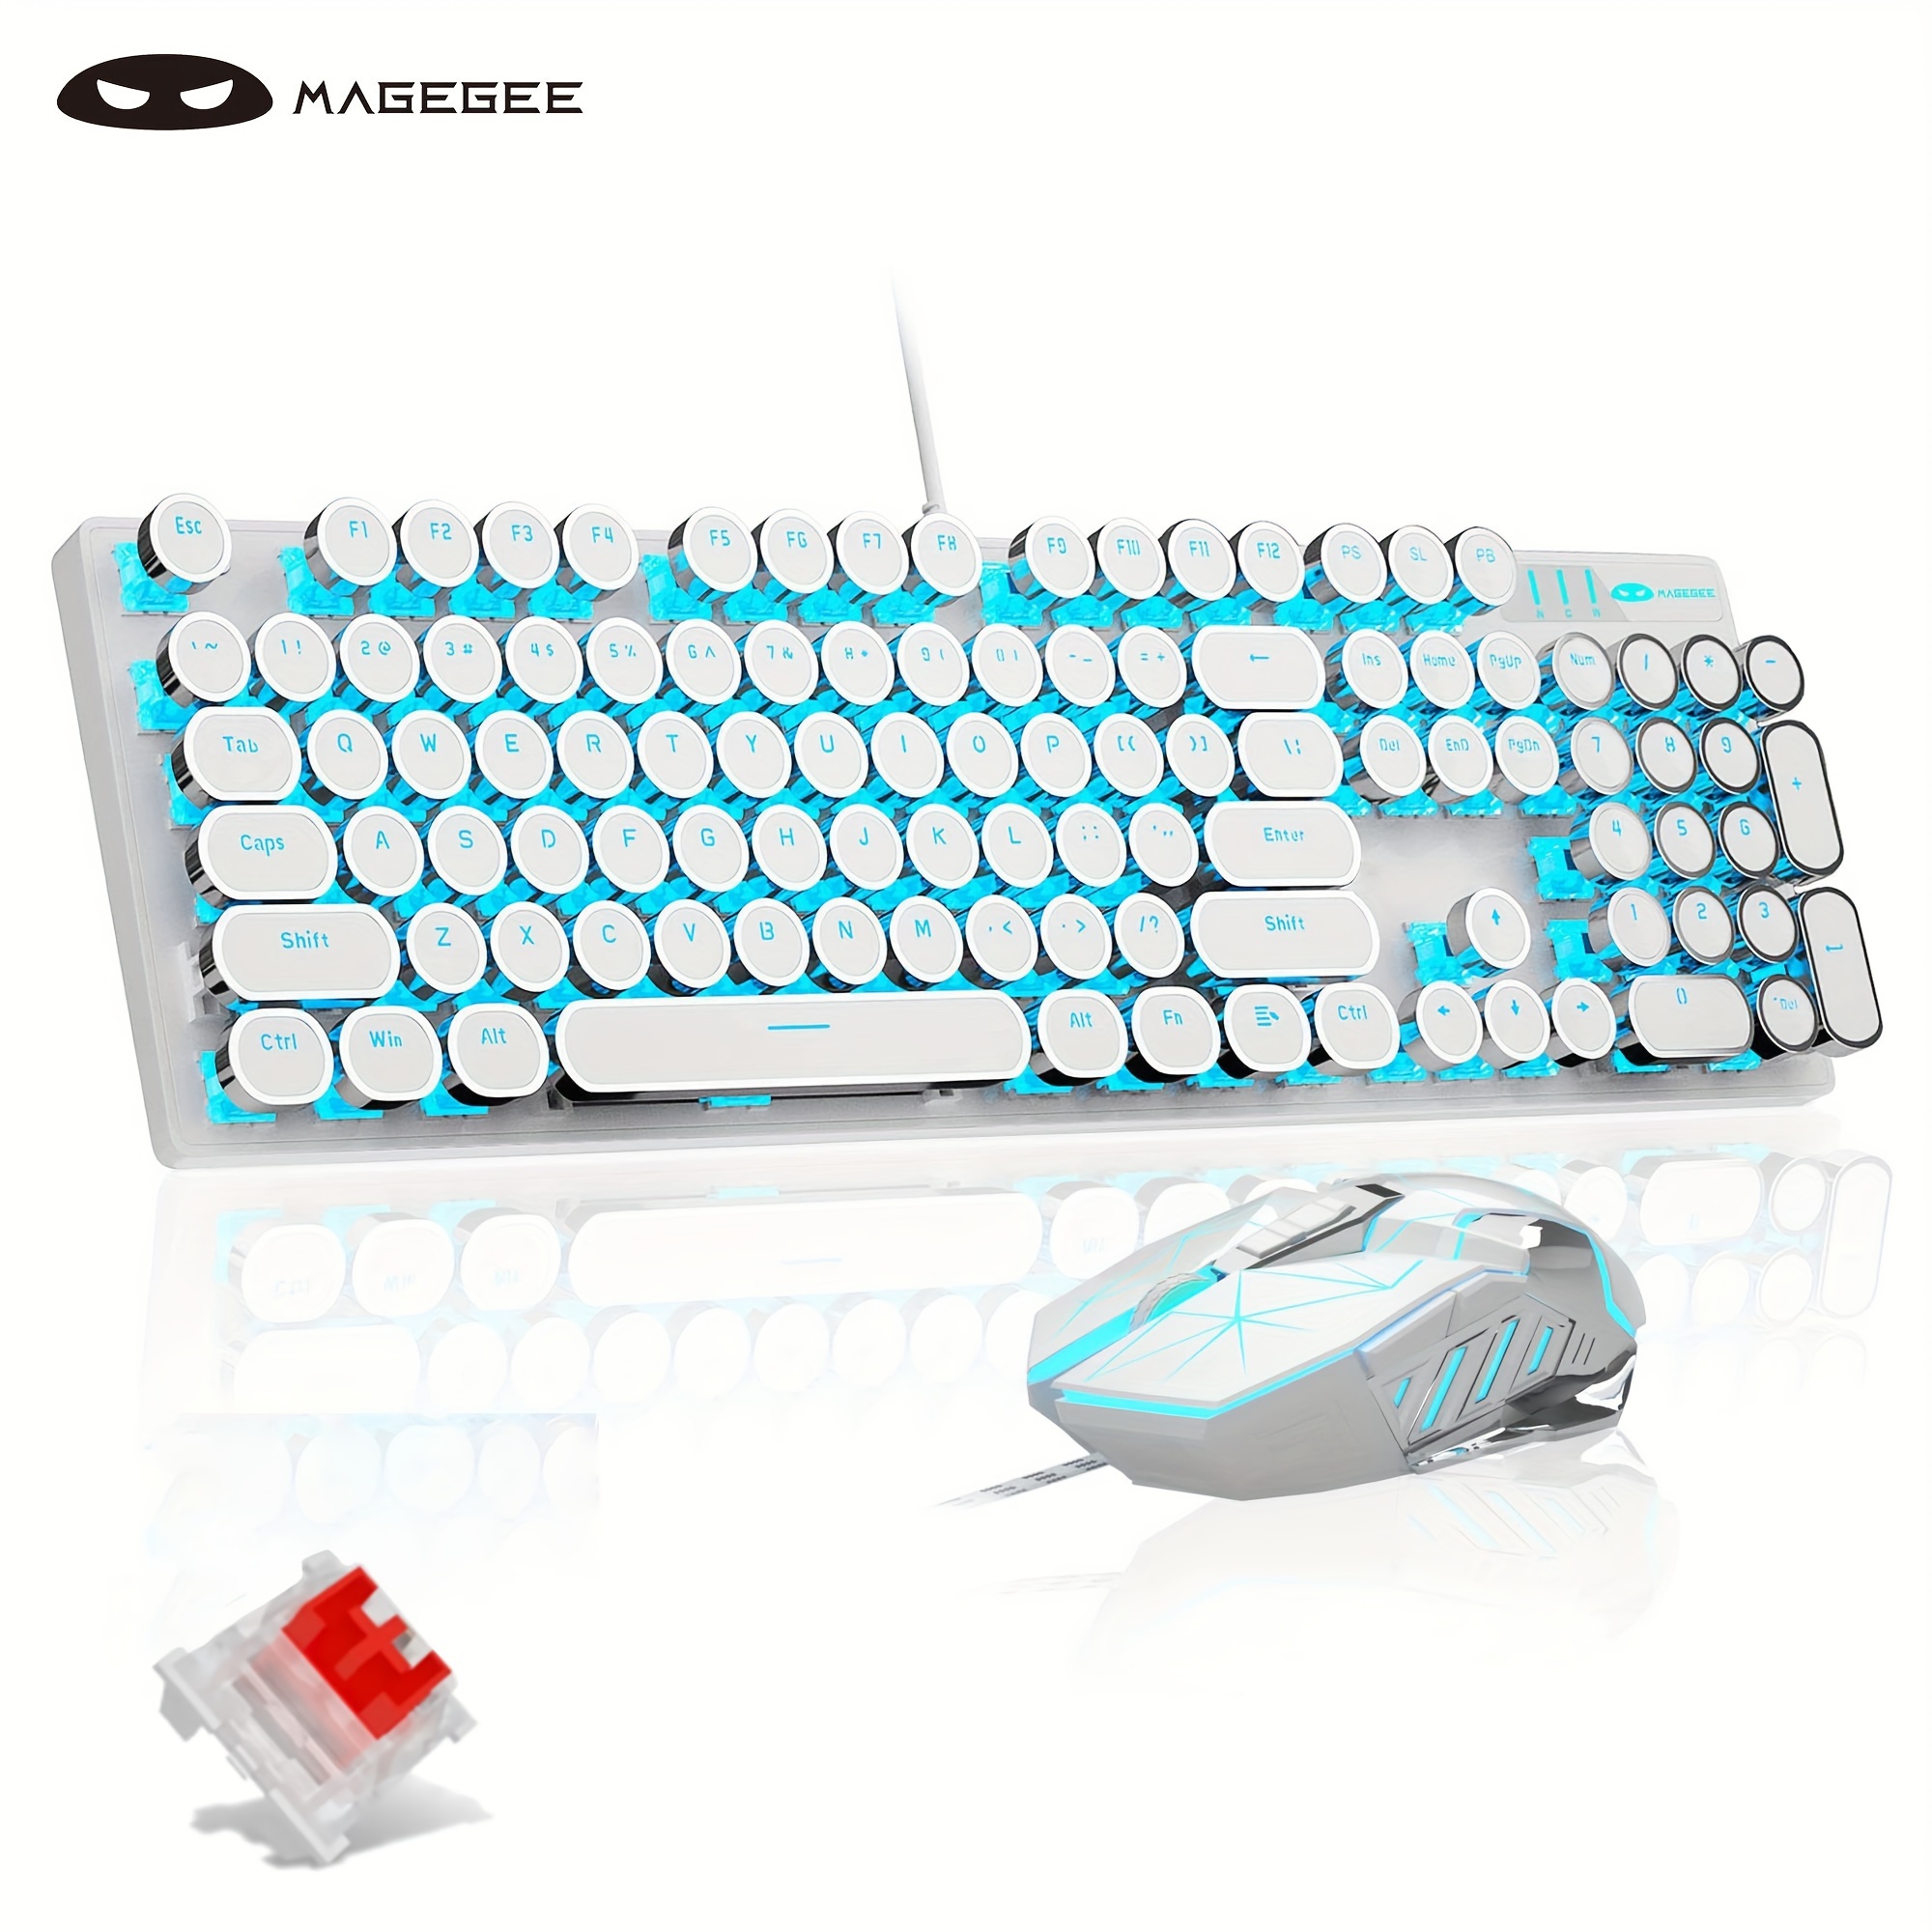 Gaming Keyboards for PC and Mac